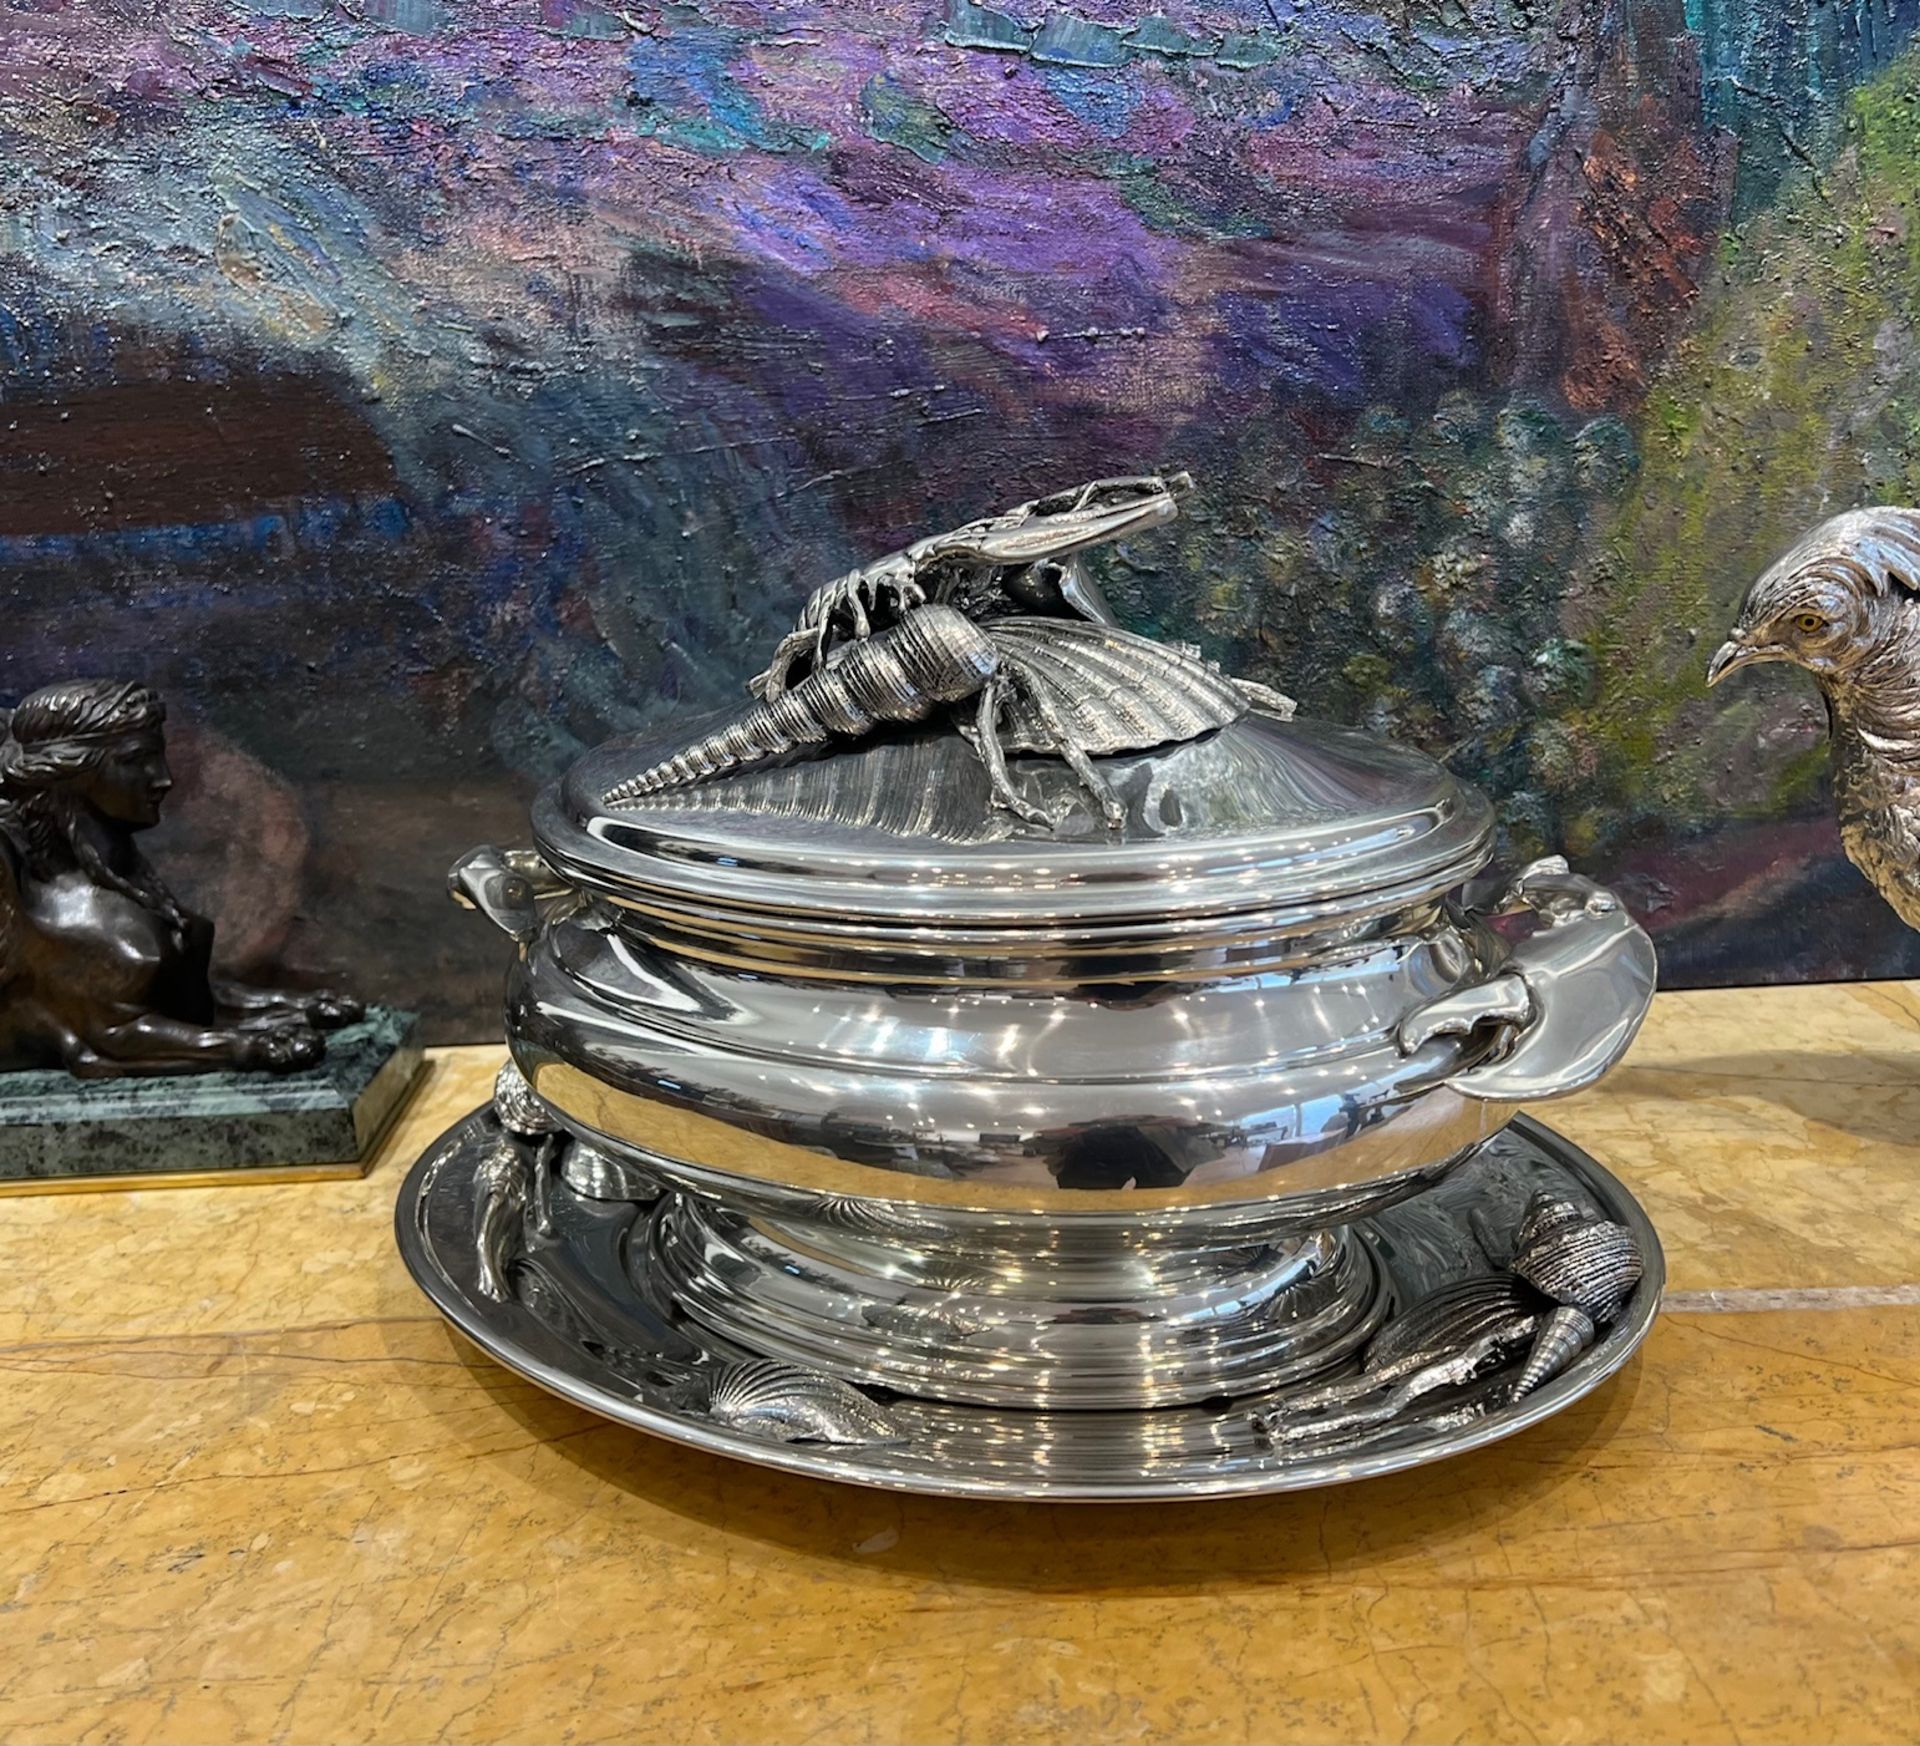 A LARGE ITALIAN SILVER PLATED SOUP TUREEN IN THE STYLE OF BUCCELLATI - Image 8 of 11